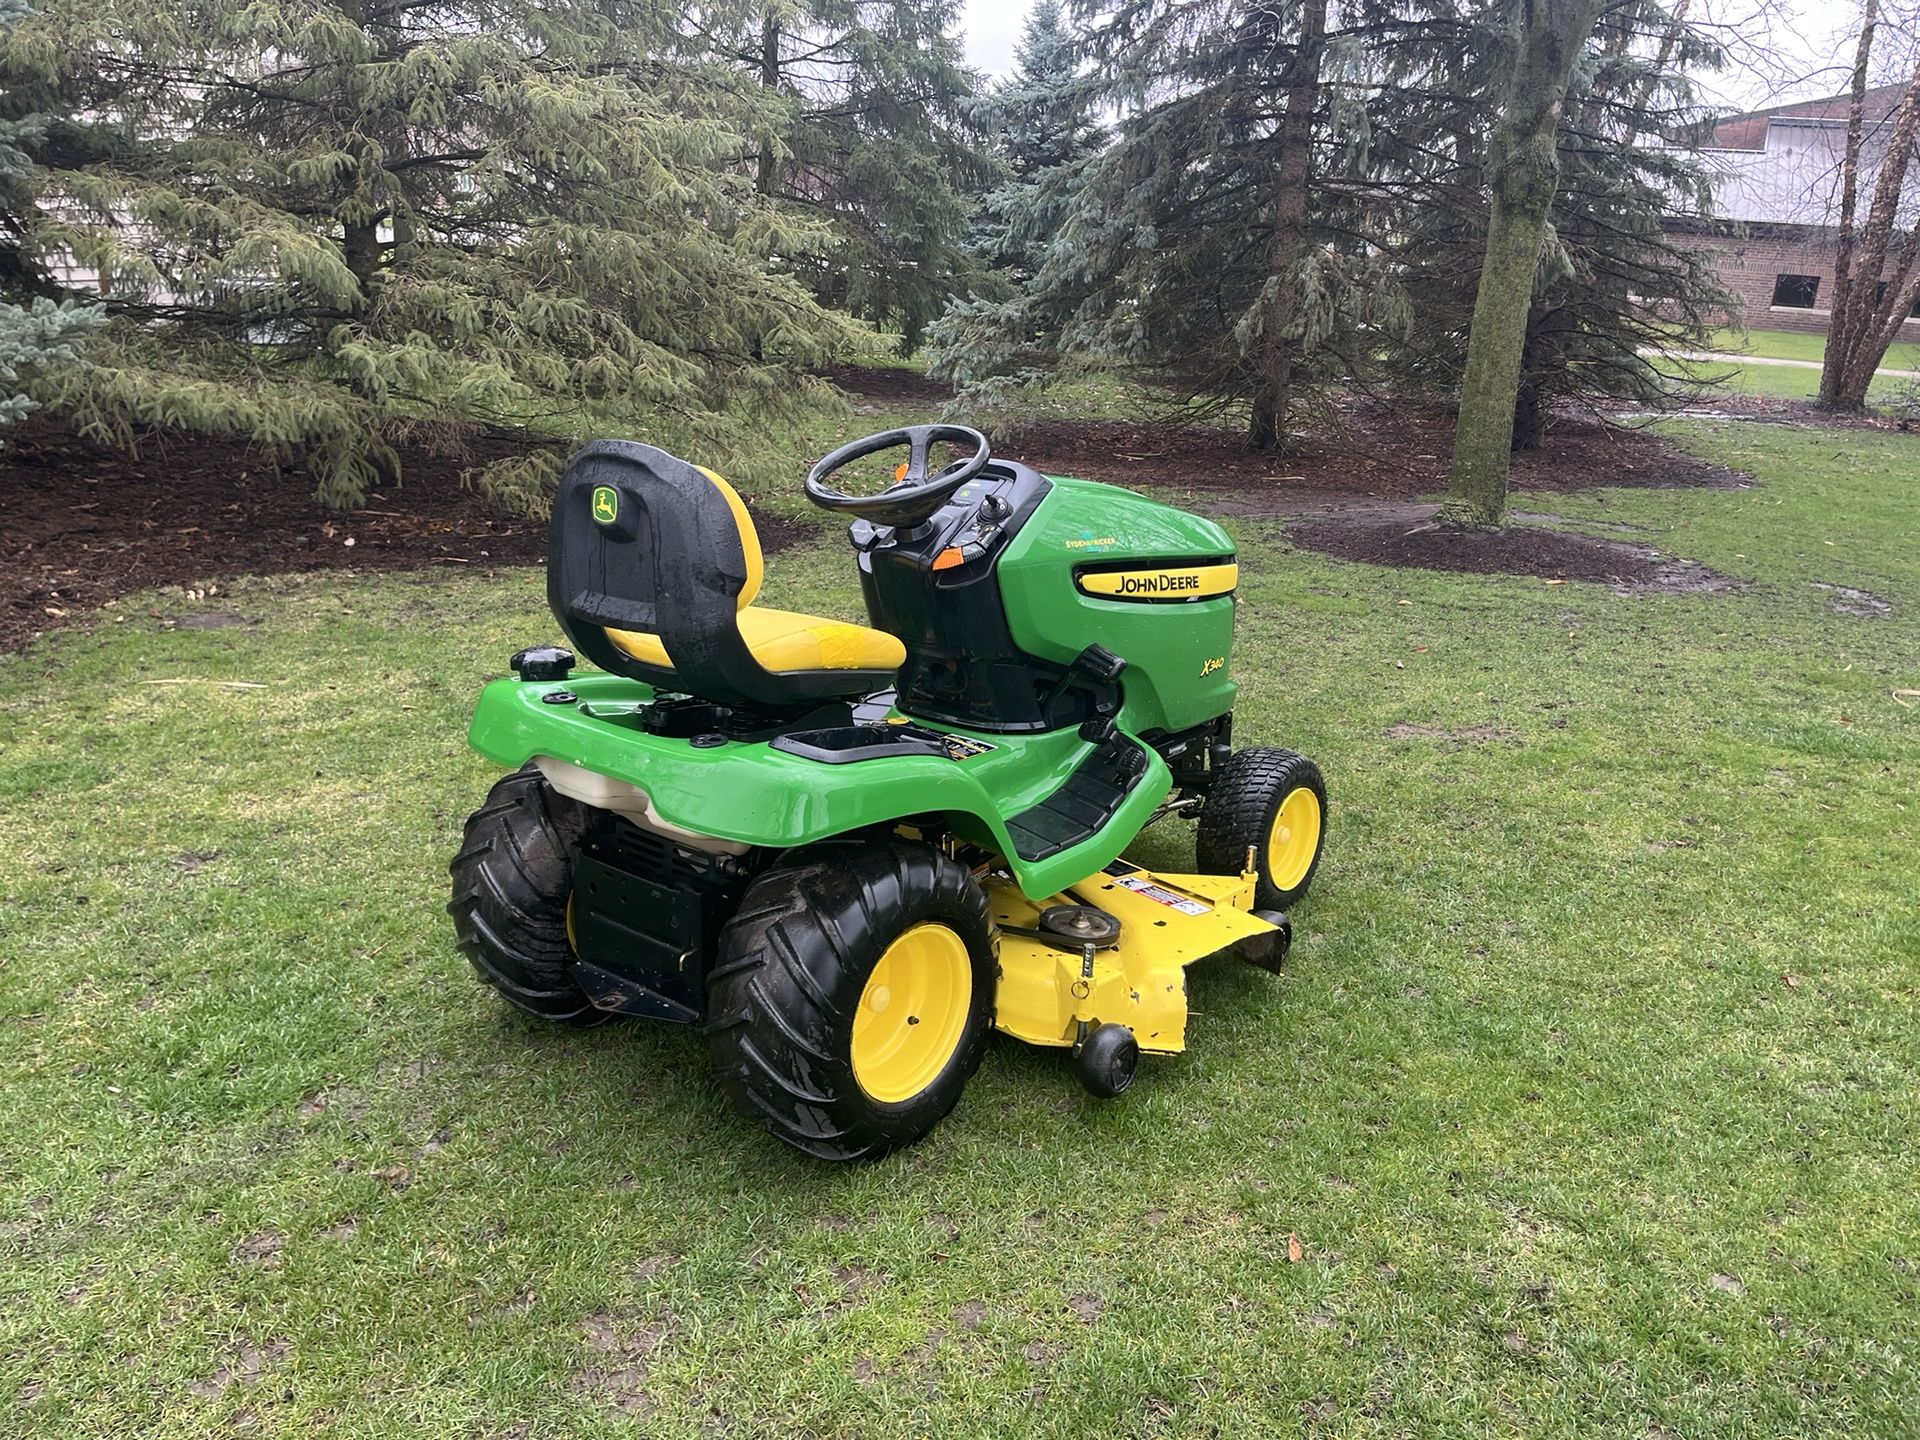 John Deere Riding Lawn Mower With A 54 In Deck And 25HP Kawasaki Engine 